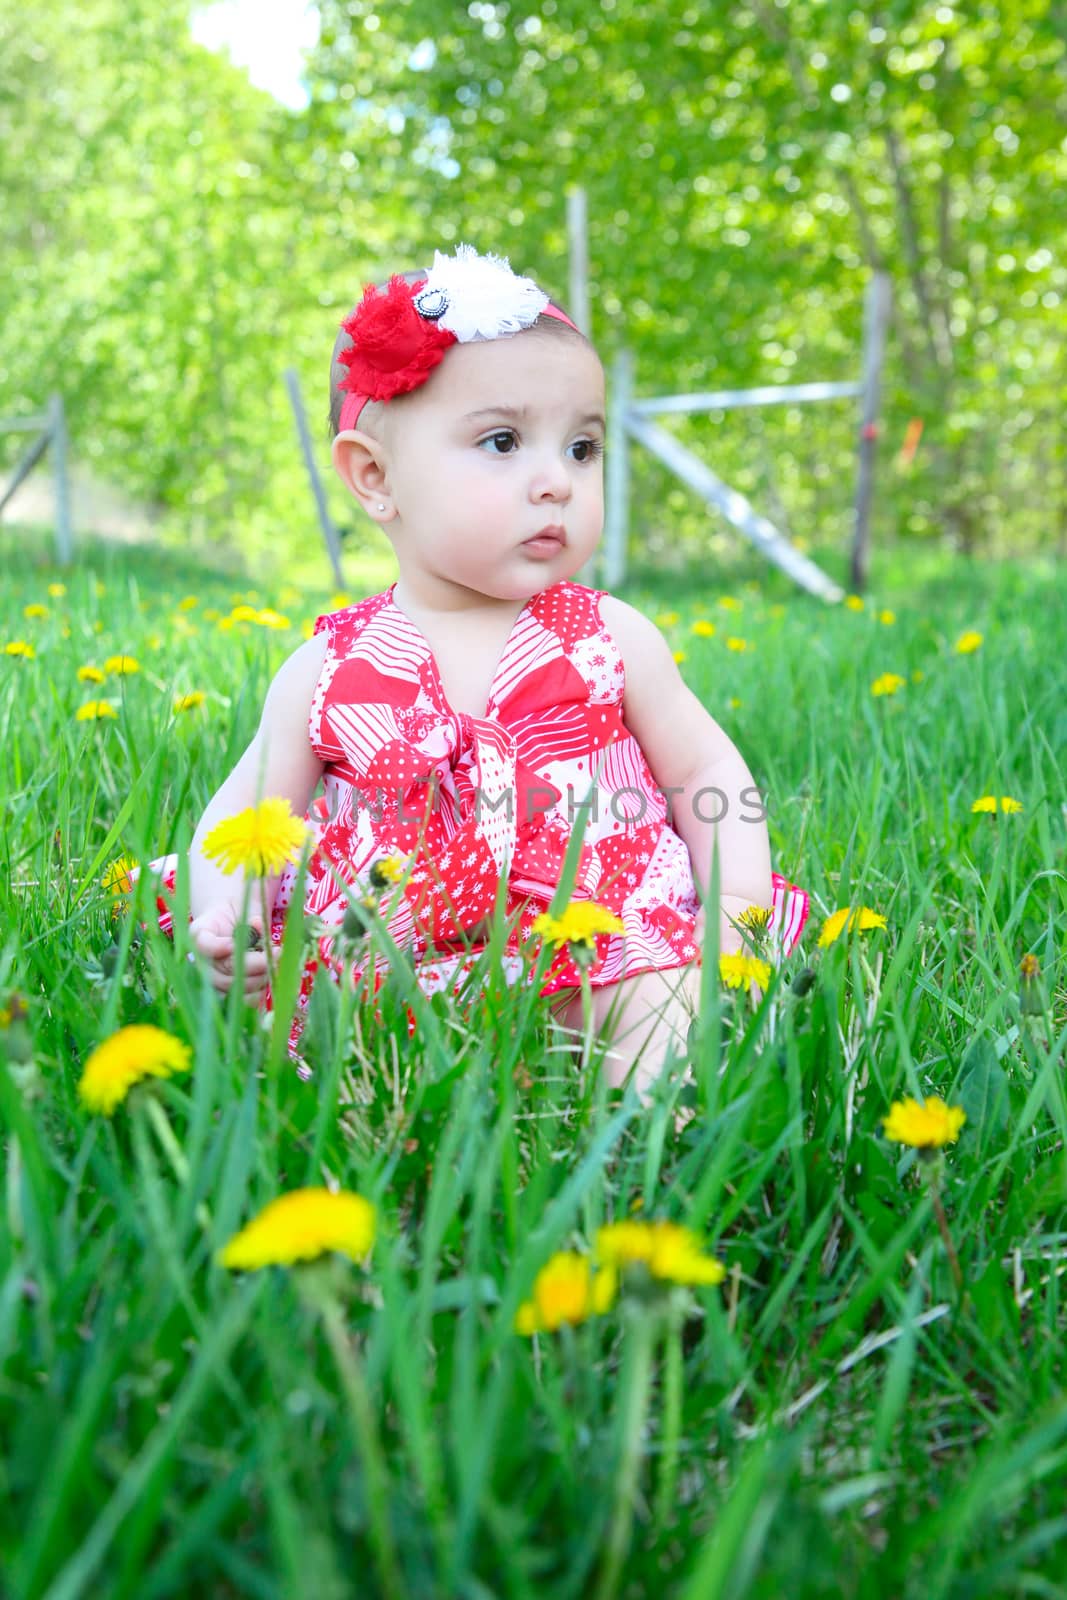 Flower baby by vanell